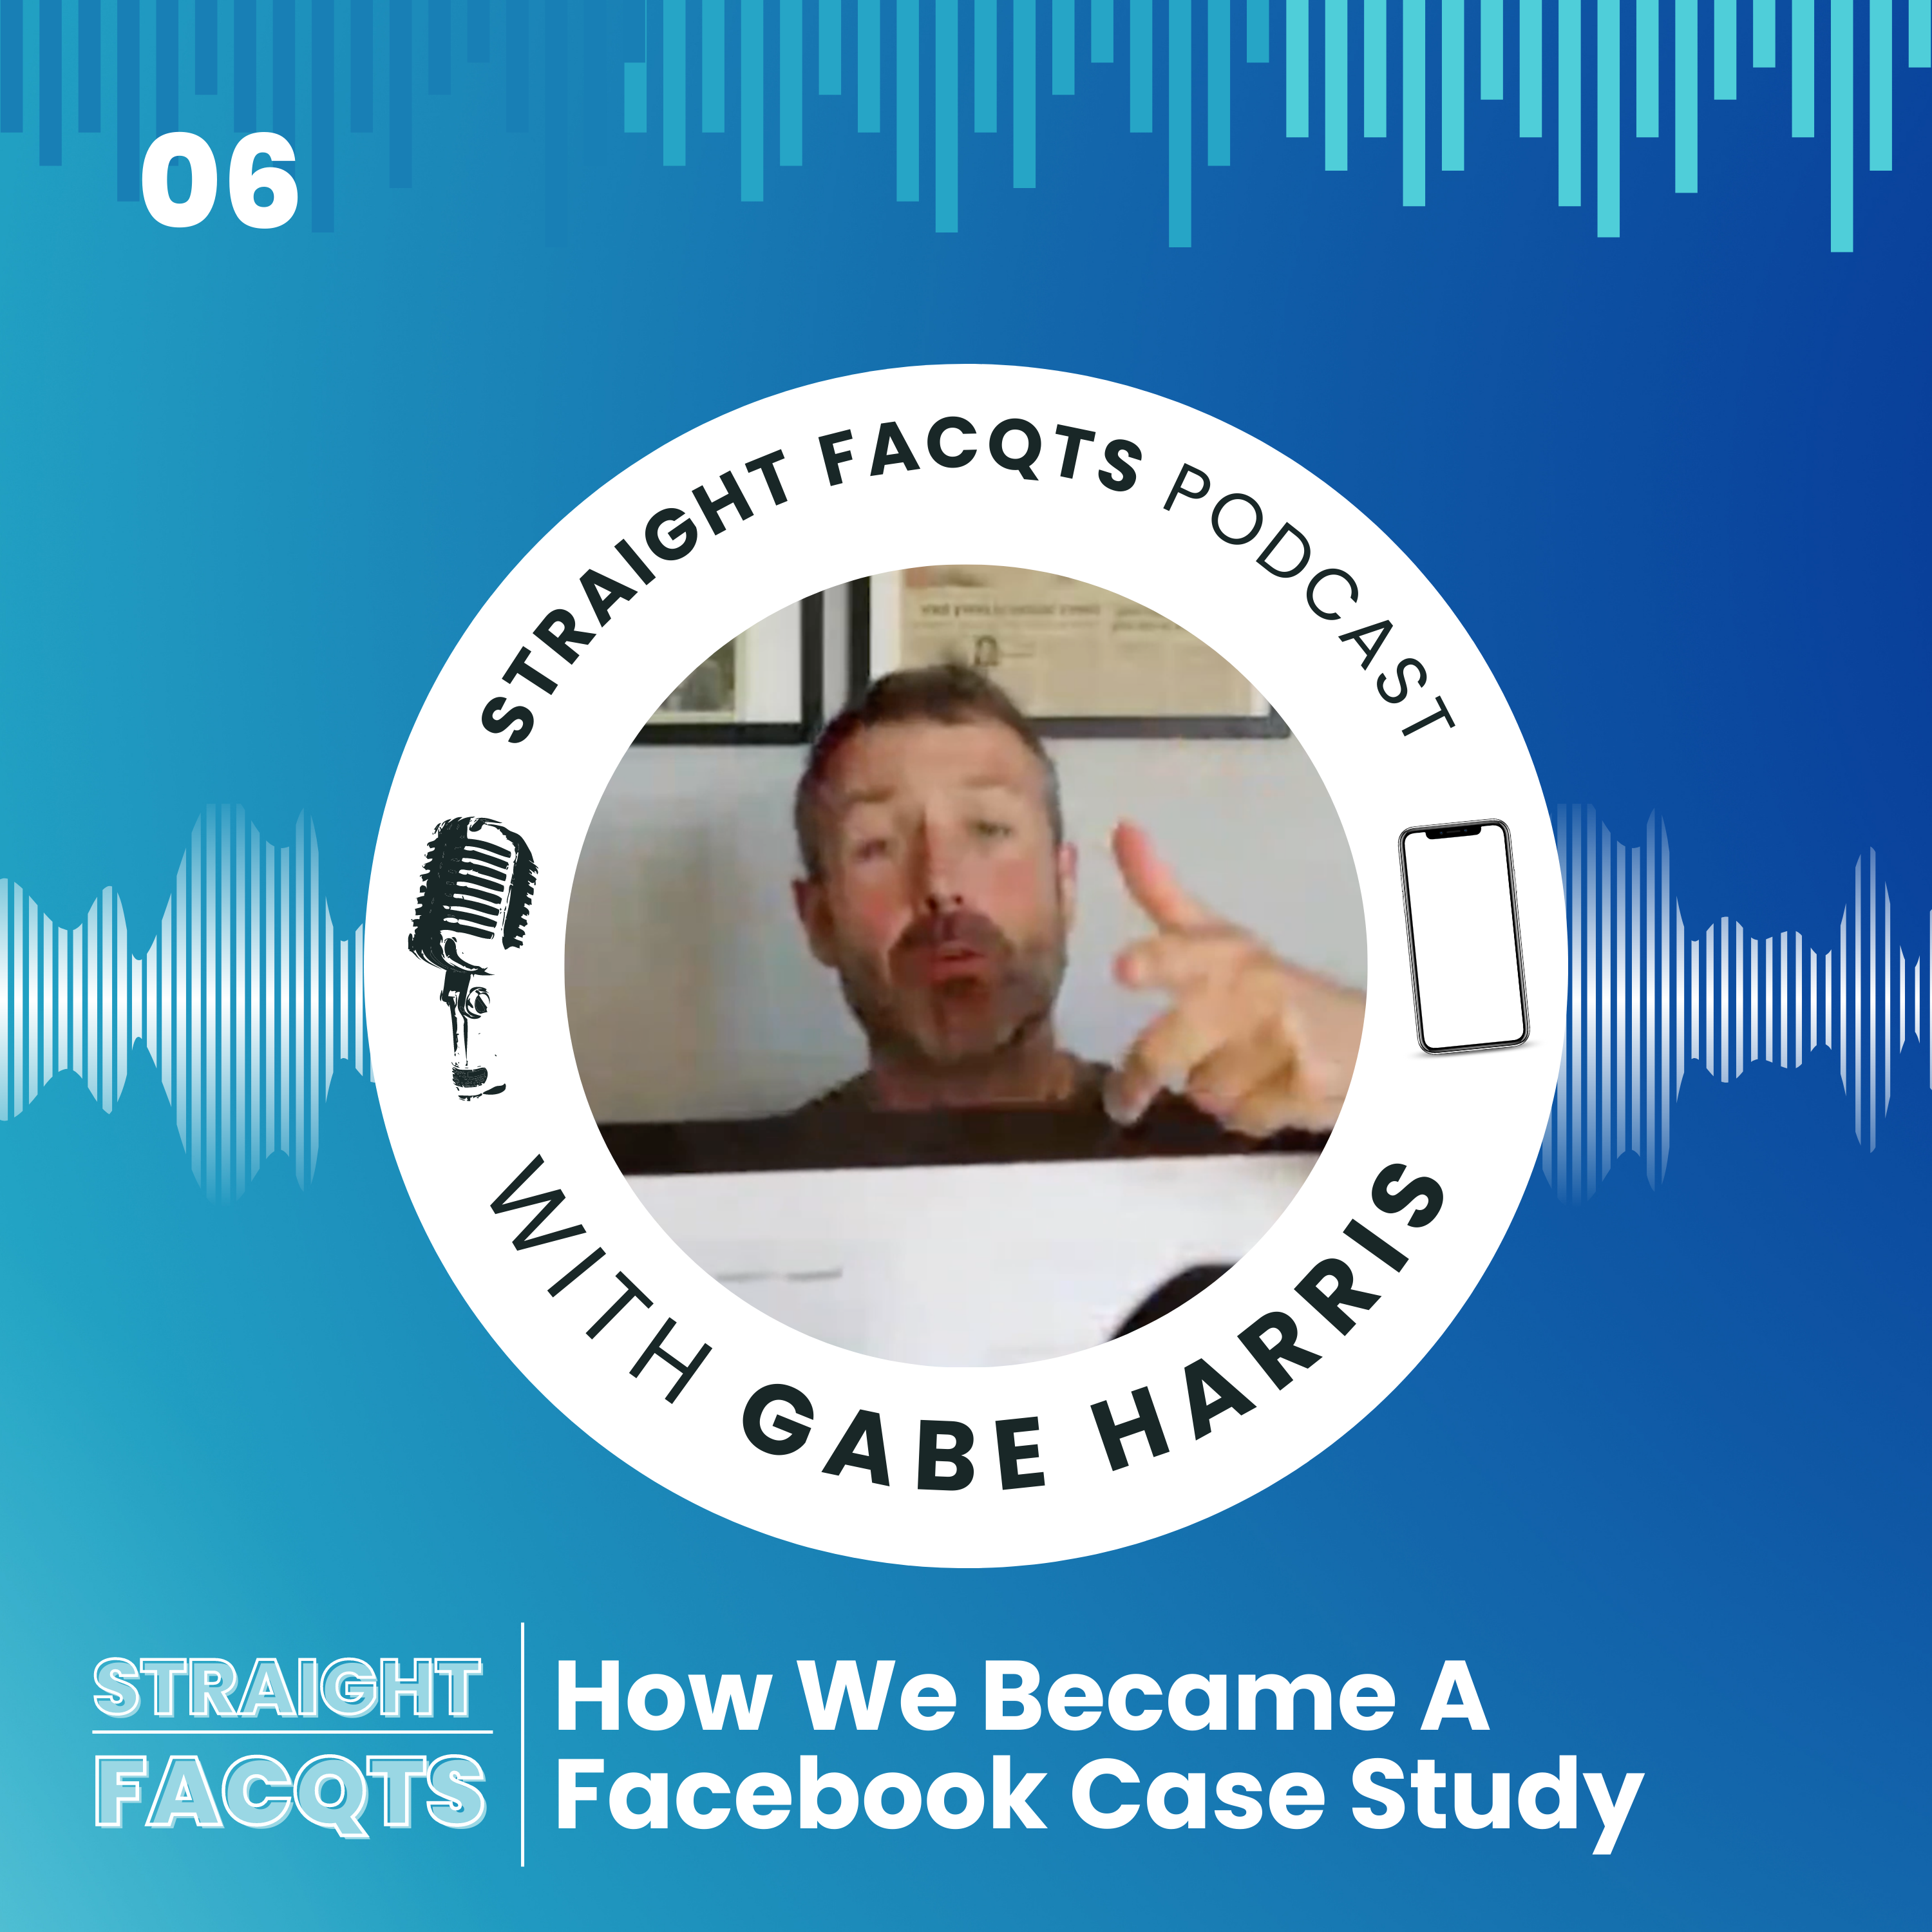 How We Became A Facebook Case Study | Straight Facqts Podcast Ep. 6